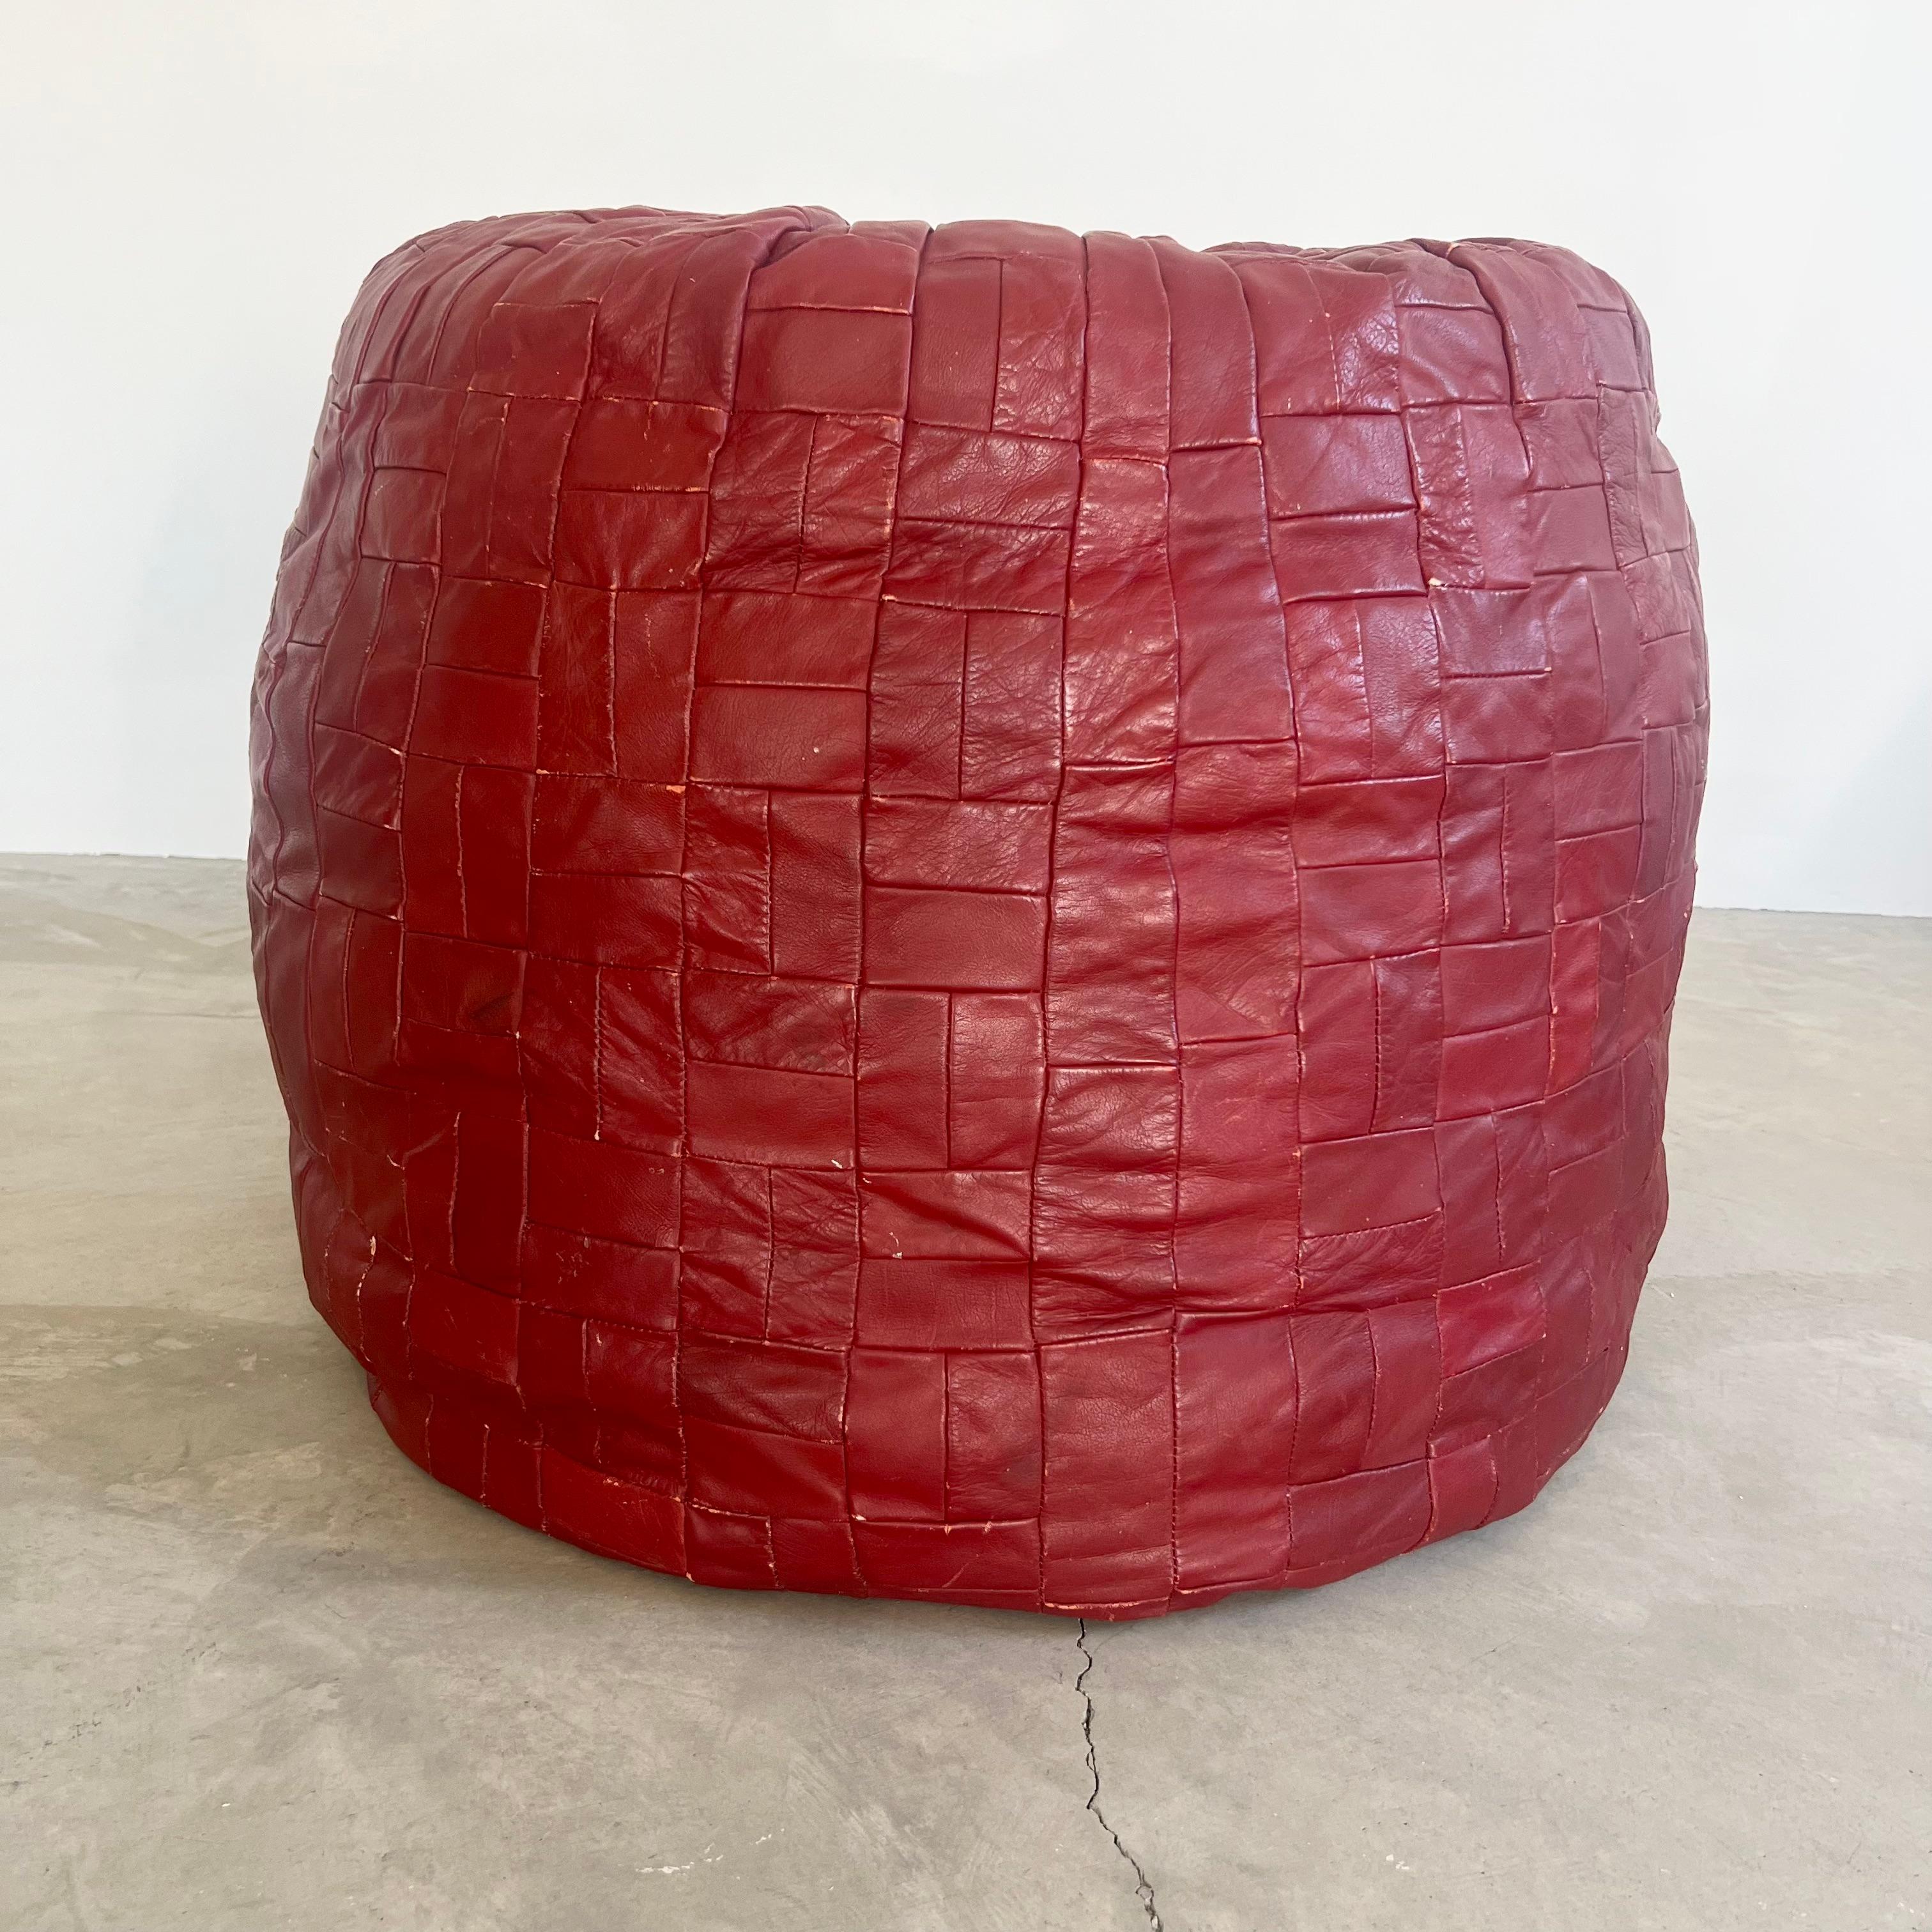 Giant patchwork leather ottomans by De Sede, Switzerland. Made in the 1970s. Deep burgundy color. Great patina and coloring to leather. Extremely unusual in that they are giant cylinders. Massive scale, just over 2 feet tall and just under 3 feet